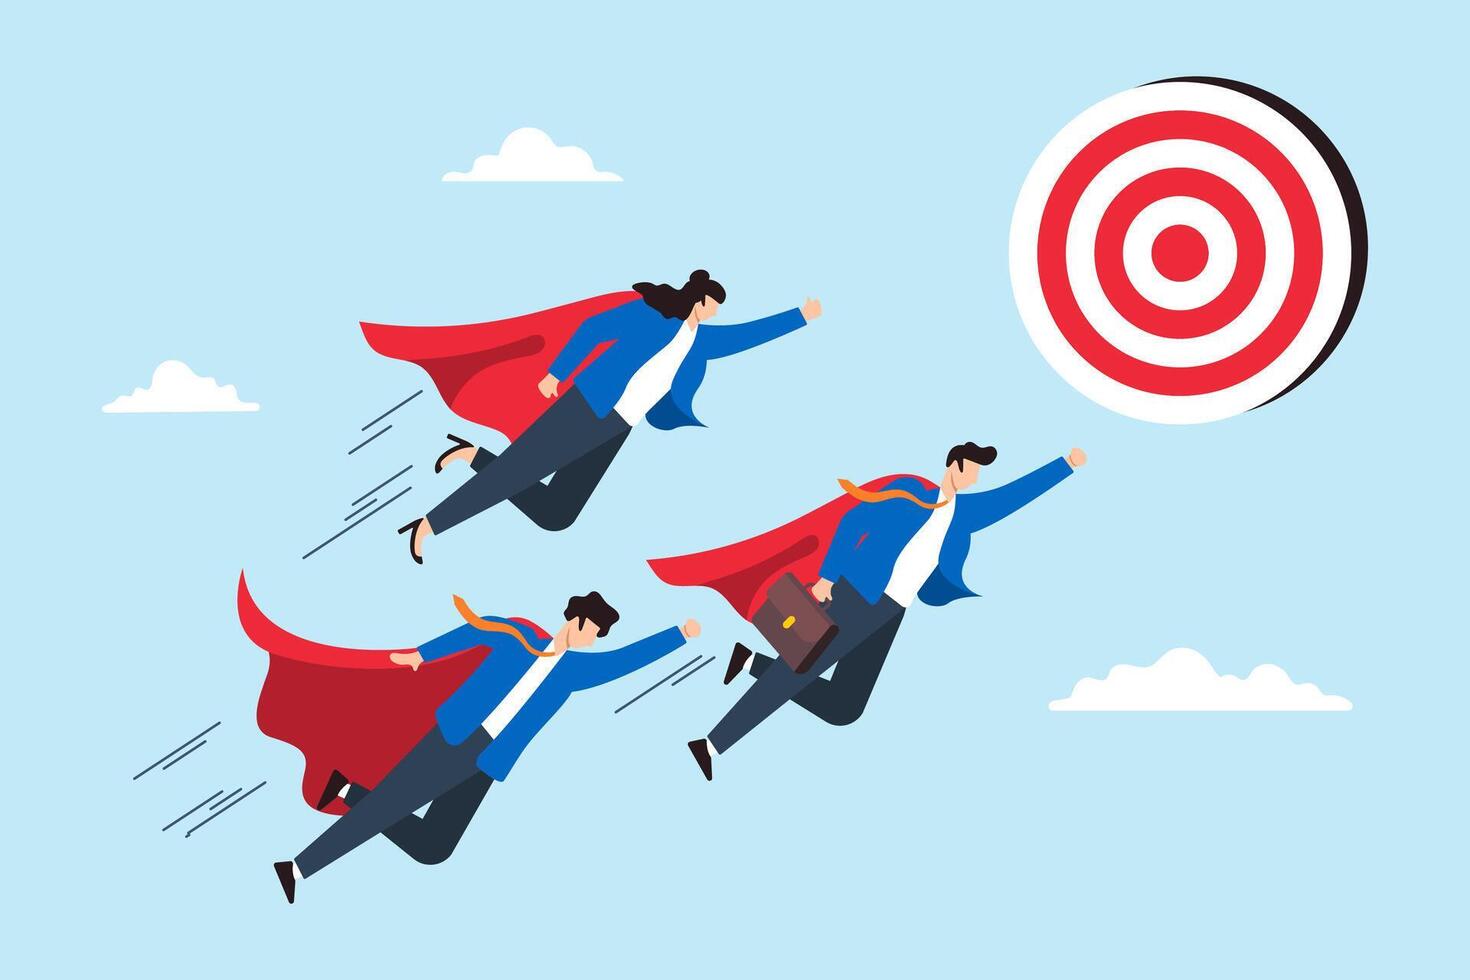 Superhero business people flying toward bullseye target illustrating teamwork, professional aim, and reaching goals. Concept of collaborative effort, leadership, and determination to achieve success vector